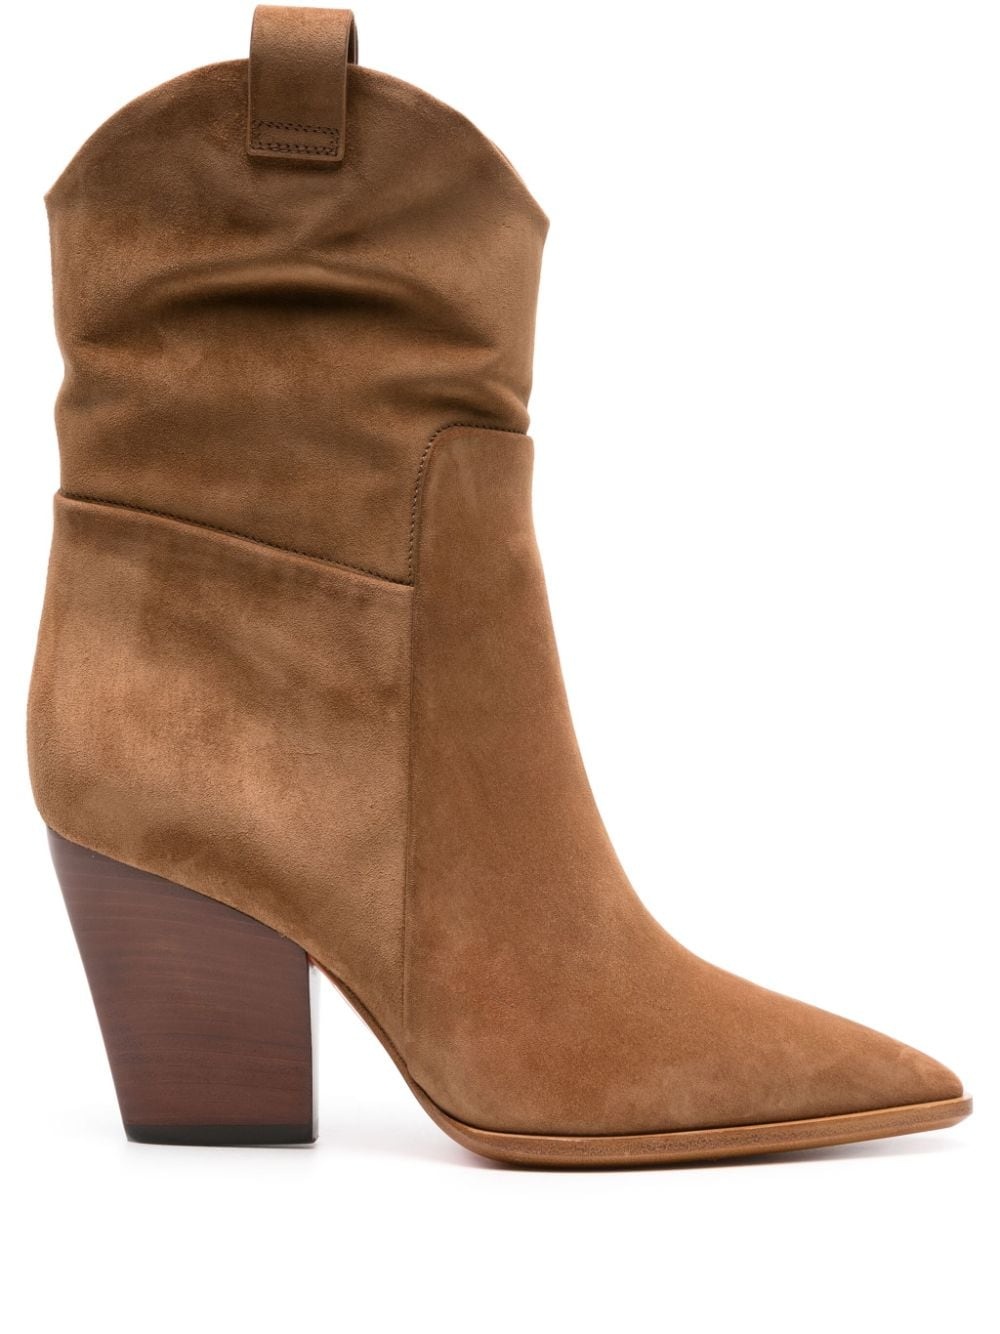 90mm suede ankle boots - 1